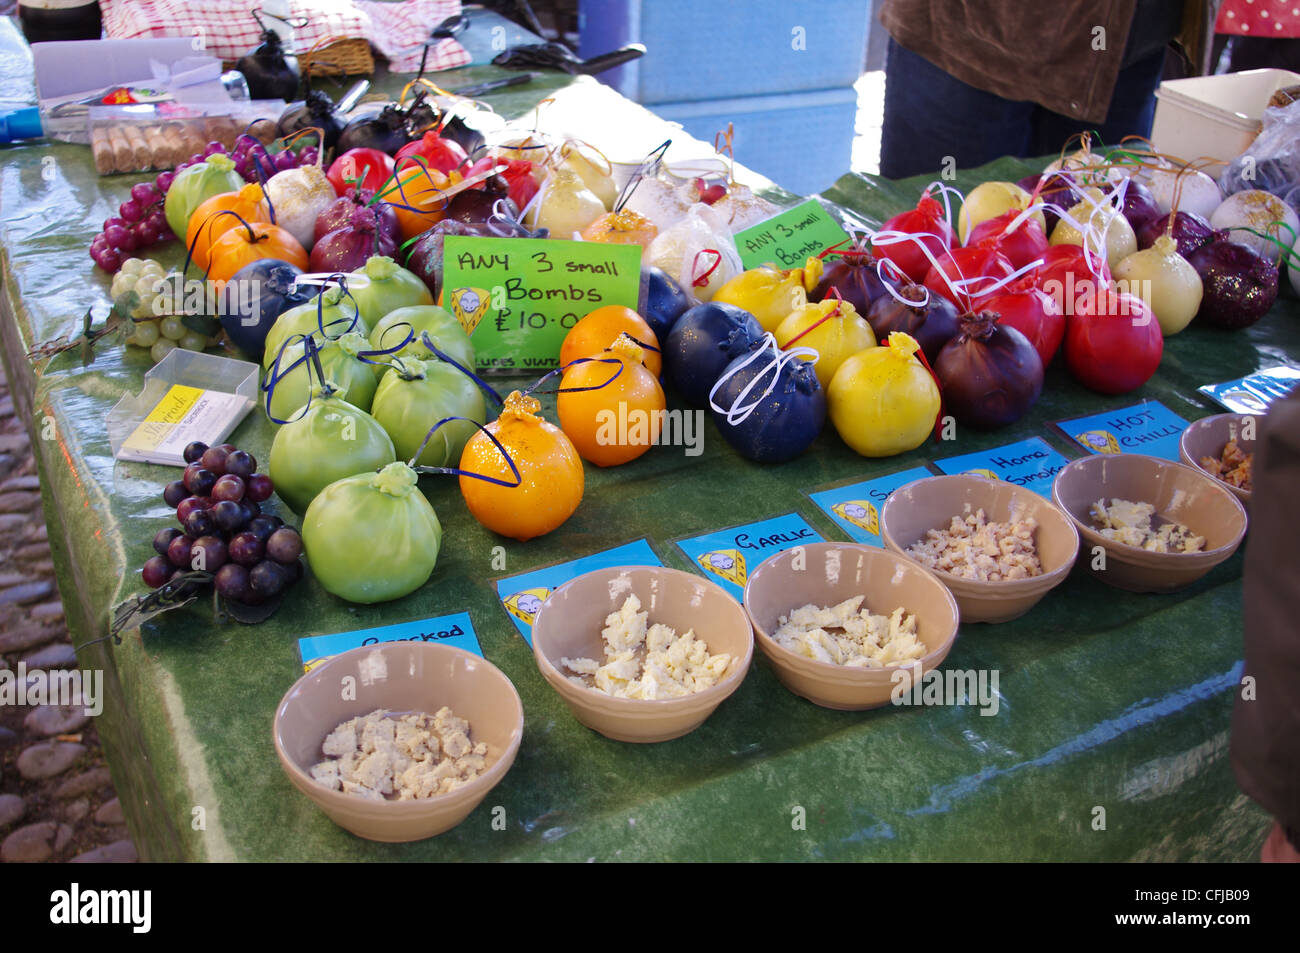 Waxed cheeses on a outdoor market stall Stock Photo